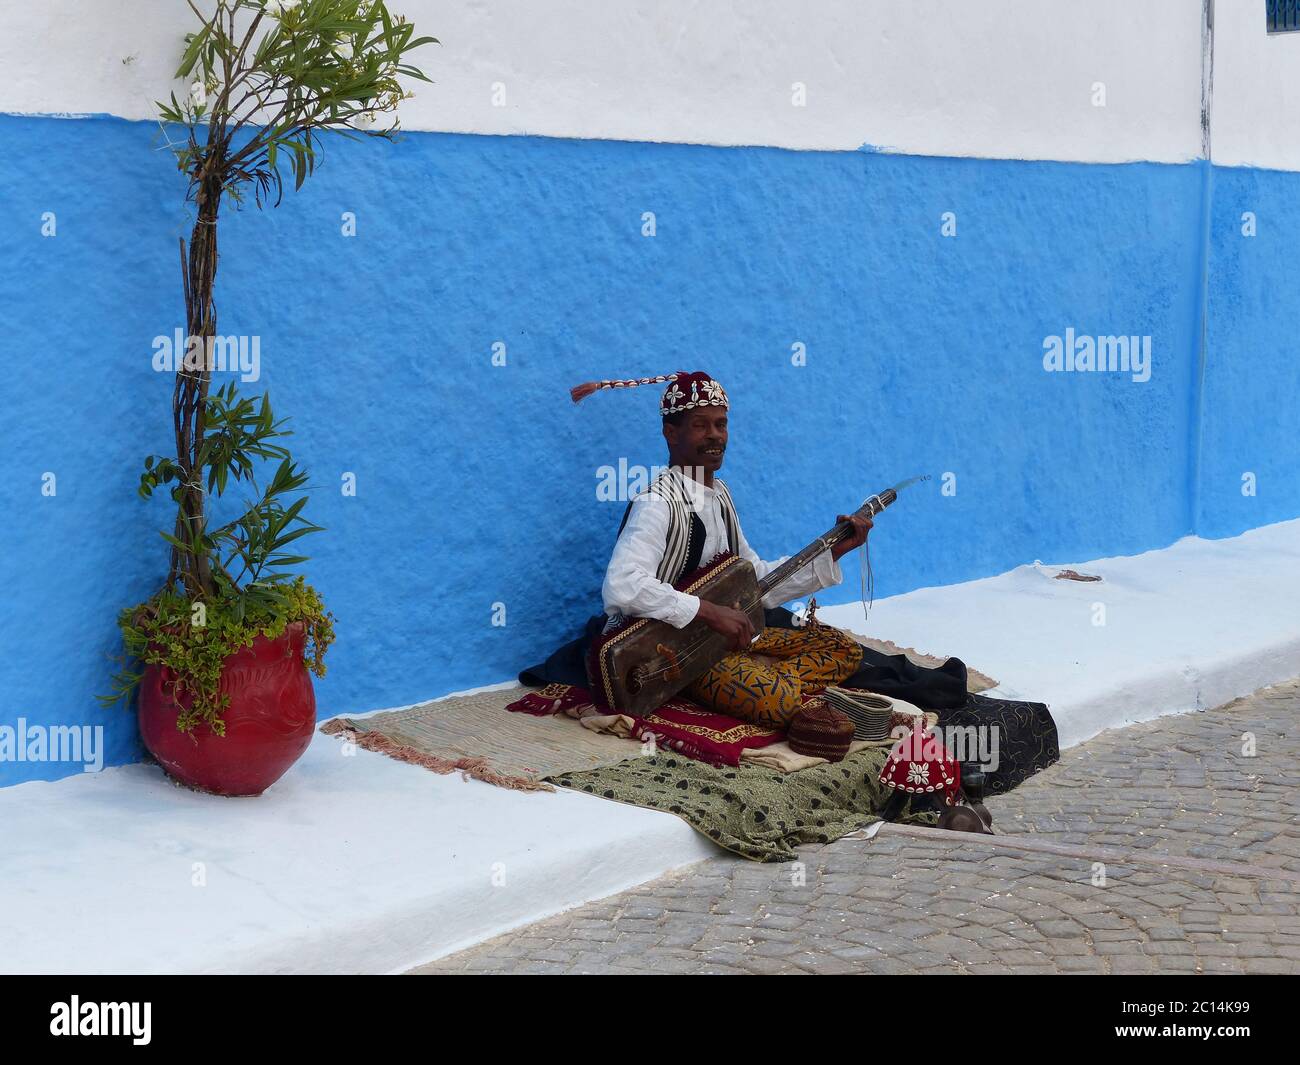 Morocco, Chefchaouen a local man selling handwork in the street Stock Photo